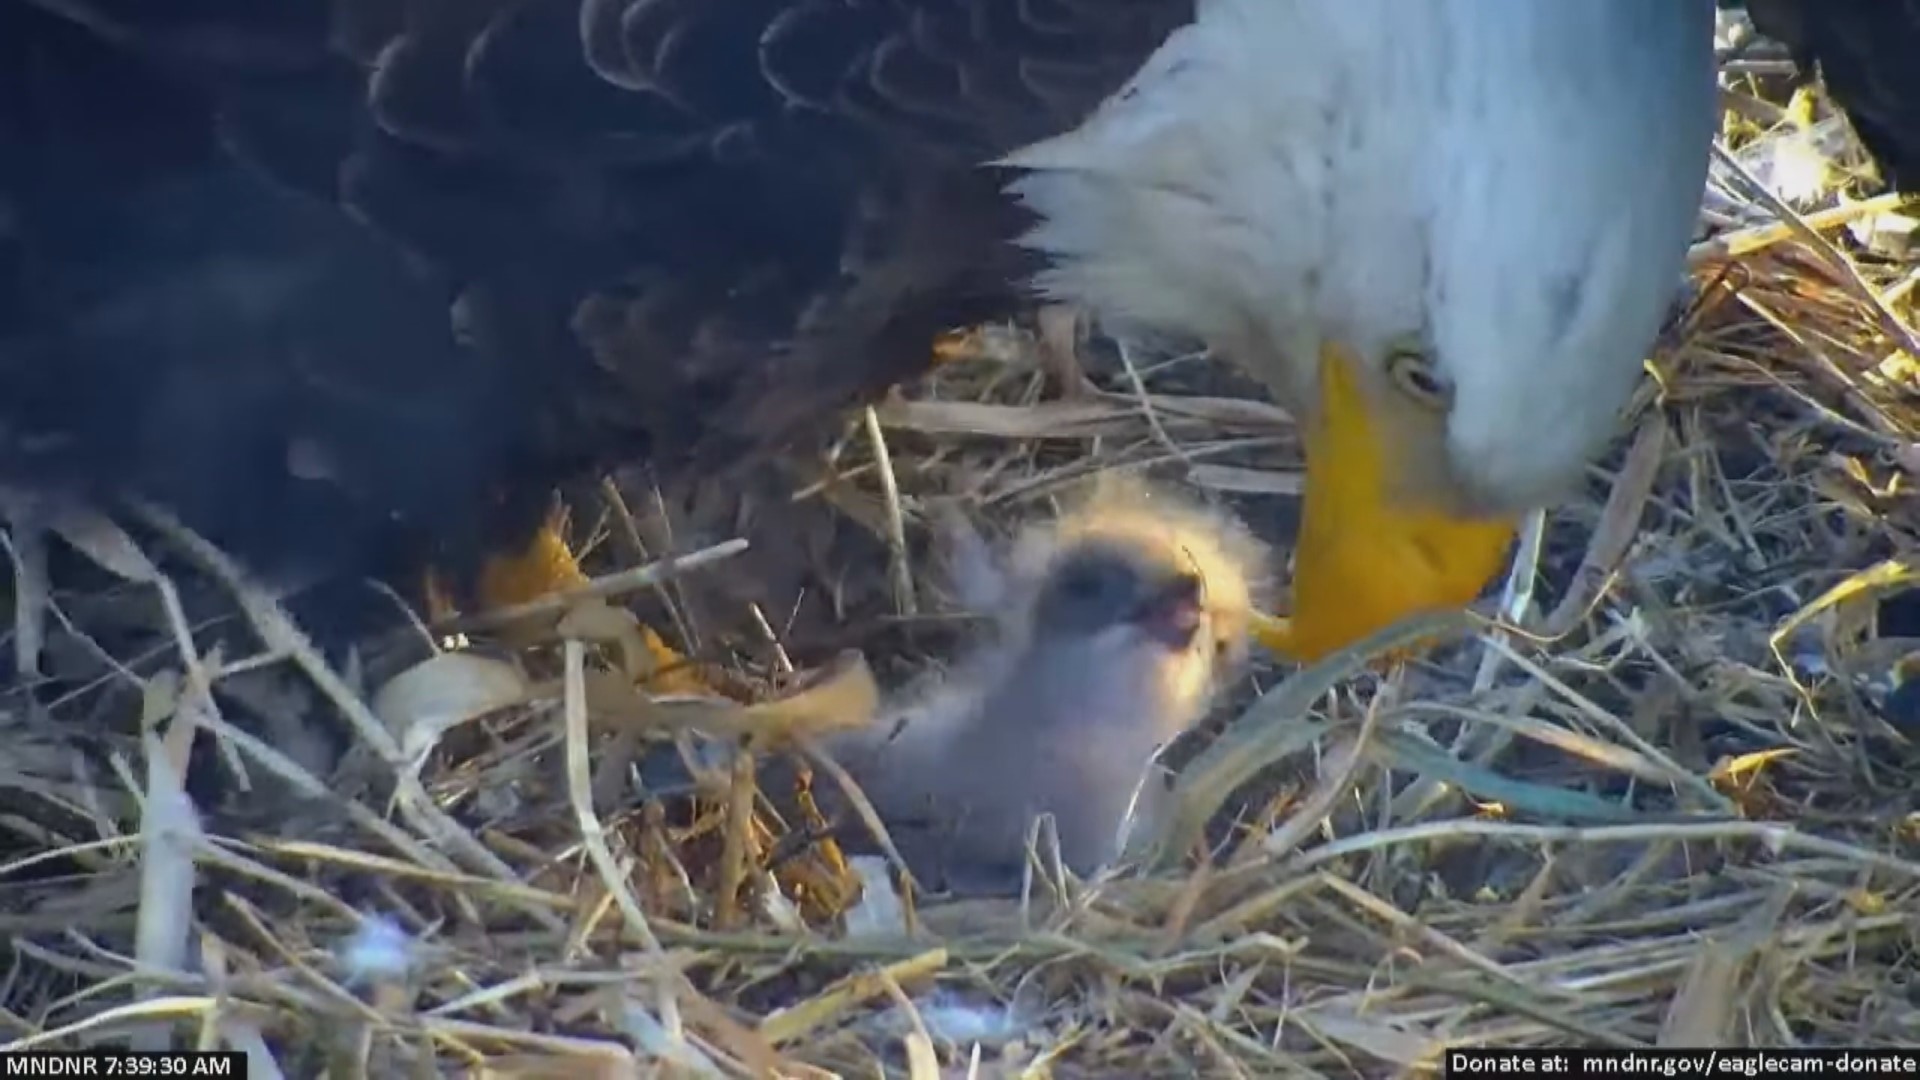 A newborn eaglet made its debut Monday morning on the Minnesota DNR's Nongame Wildlife EagleCam, less than a day after its birth.